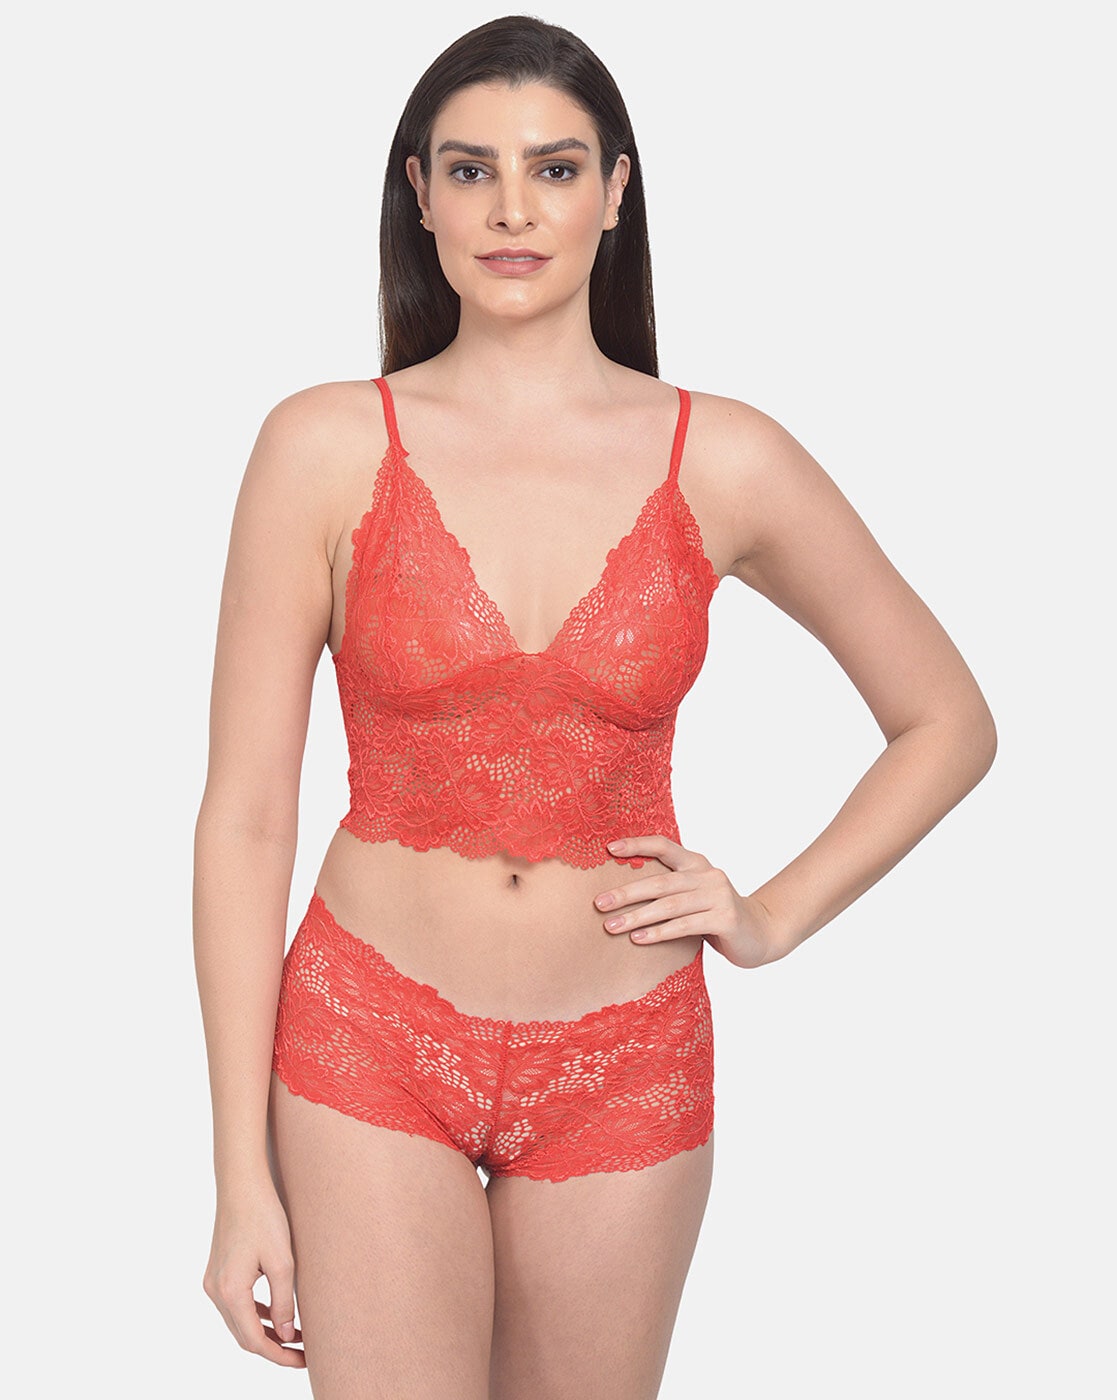 Shyle's lace and mesh Indian lingerie set in smoldering red Only on  Shyaway.com, by Shyaway Chennai